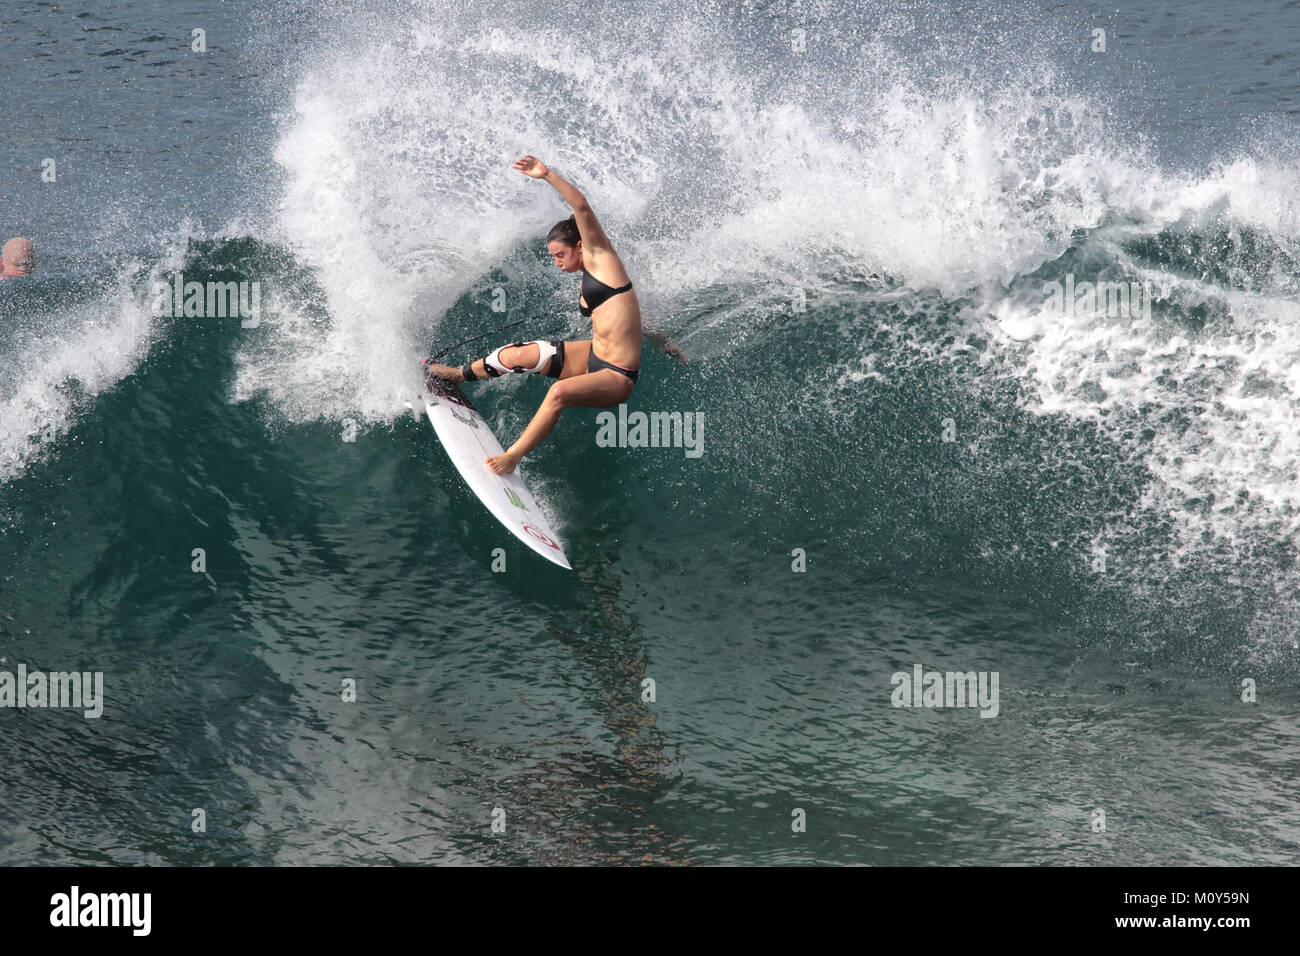 Tyler Wright prepping for the Maui Pro at Honolua Bay on Maui. Stock Photo